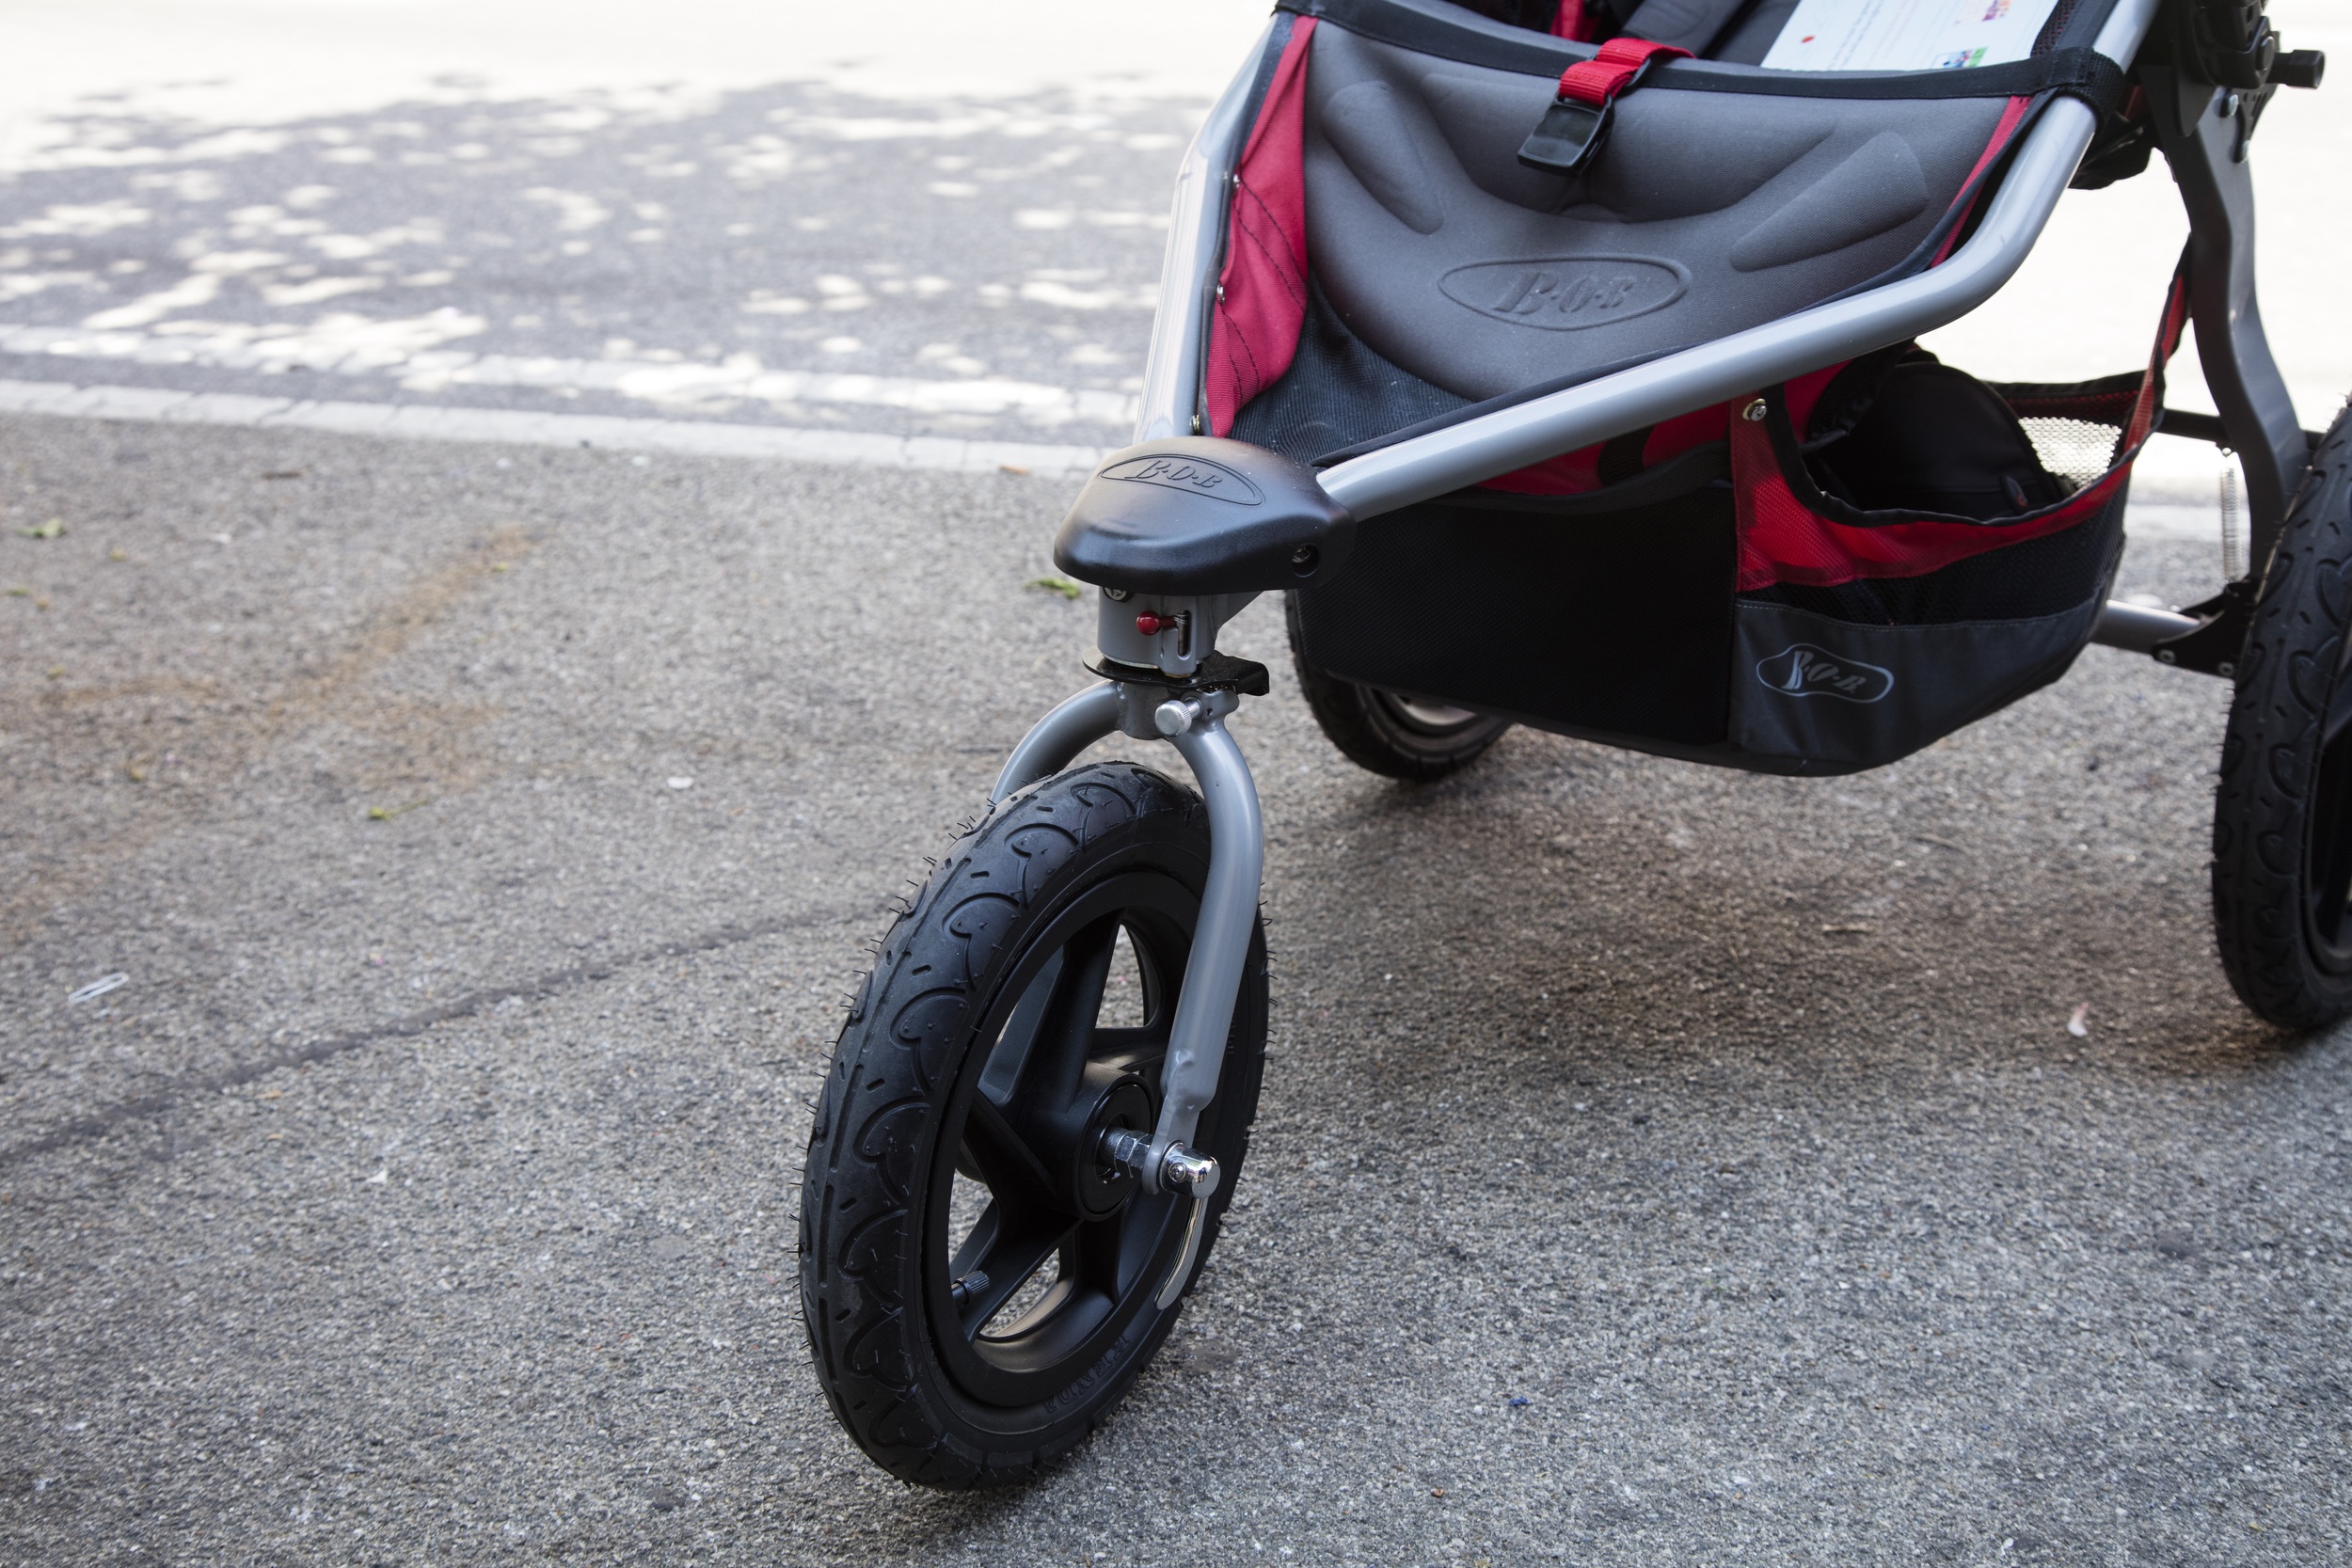 Peg Perego recalls hundreds of thousands of strollers Peg Perego recalls  hundreds of thousands of strollers